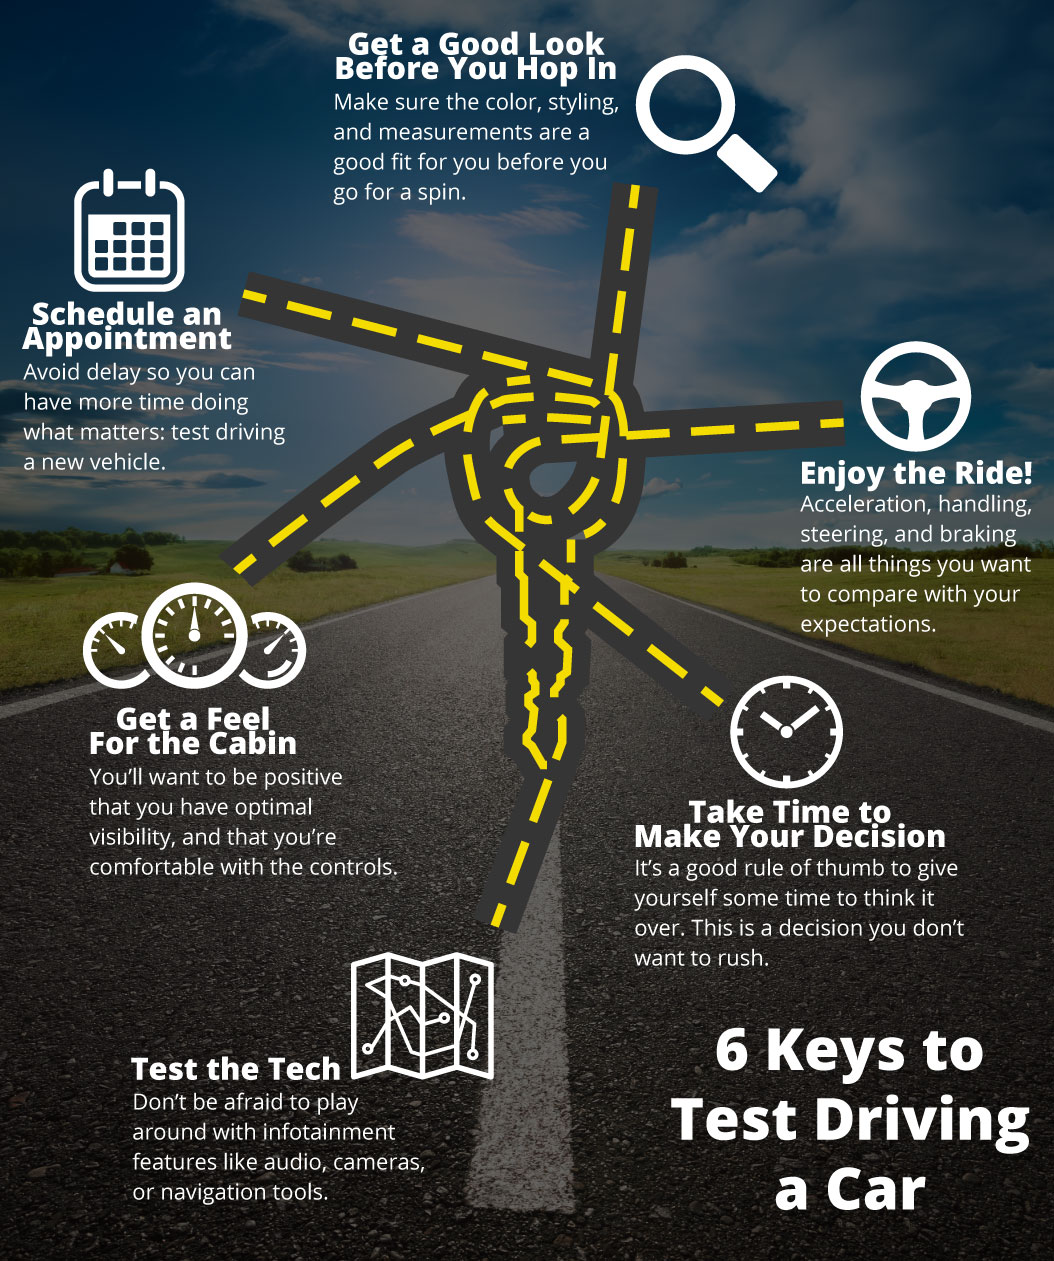 An infographic with tips on how to test drive a vehicle